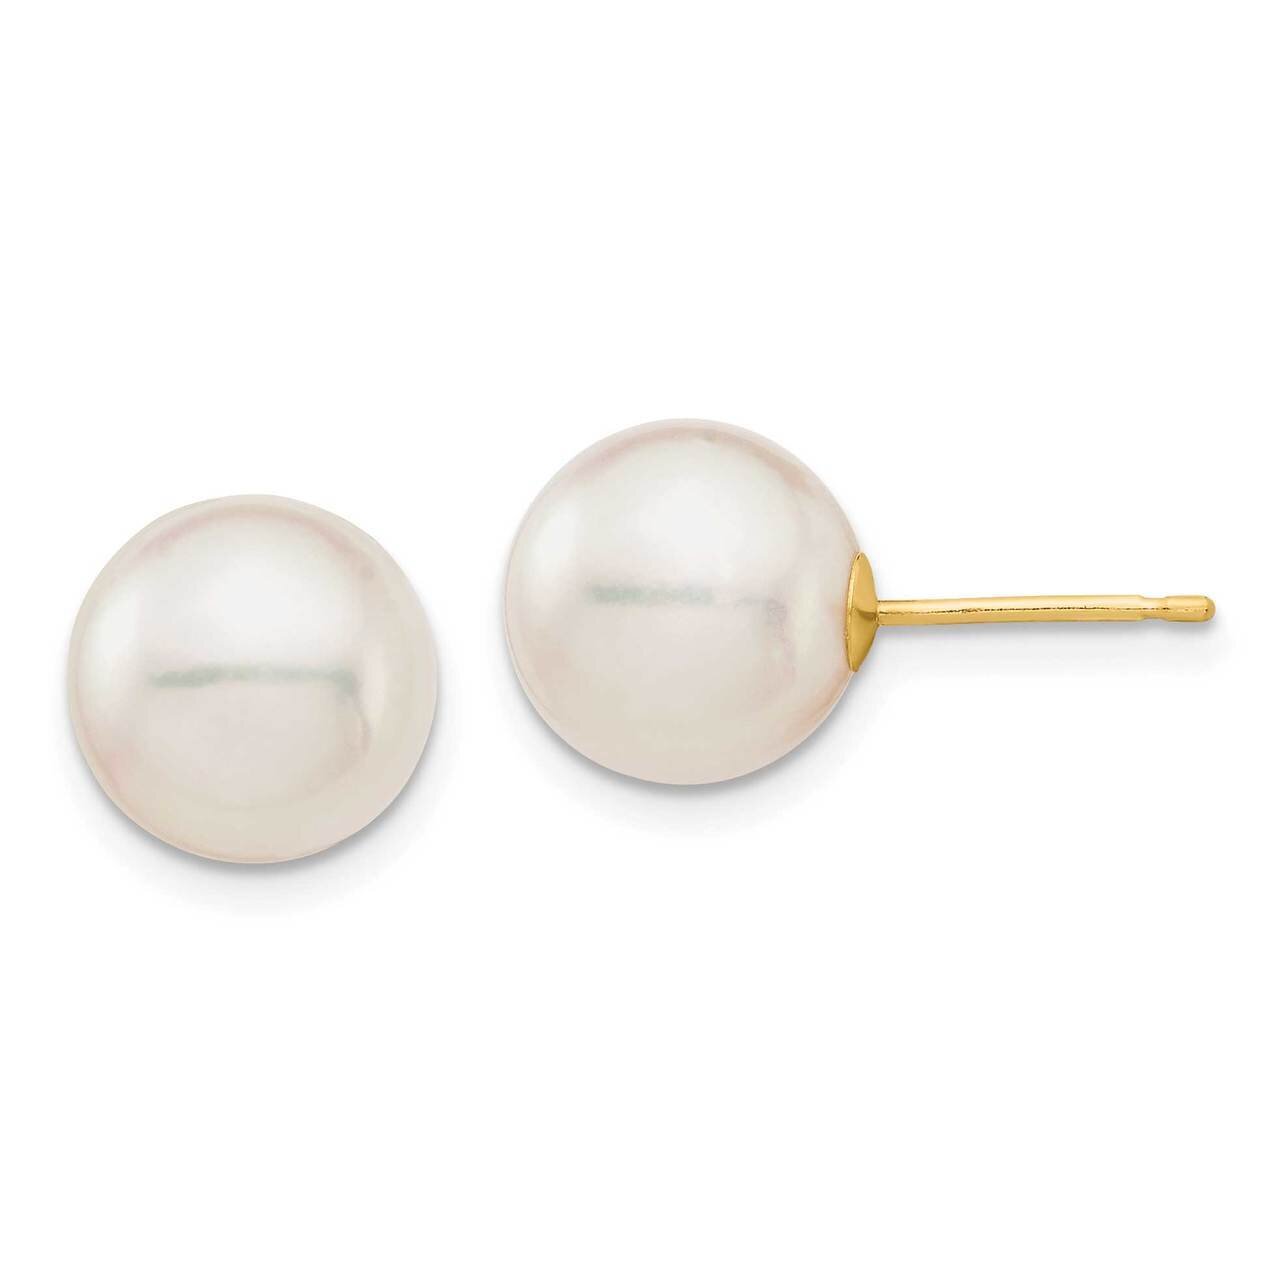 9-10mm White Round Saltwater Akoya Cultured Pearl Stud Post Earrings 14k Gold XF683E